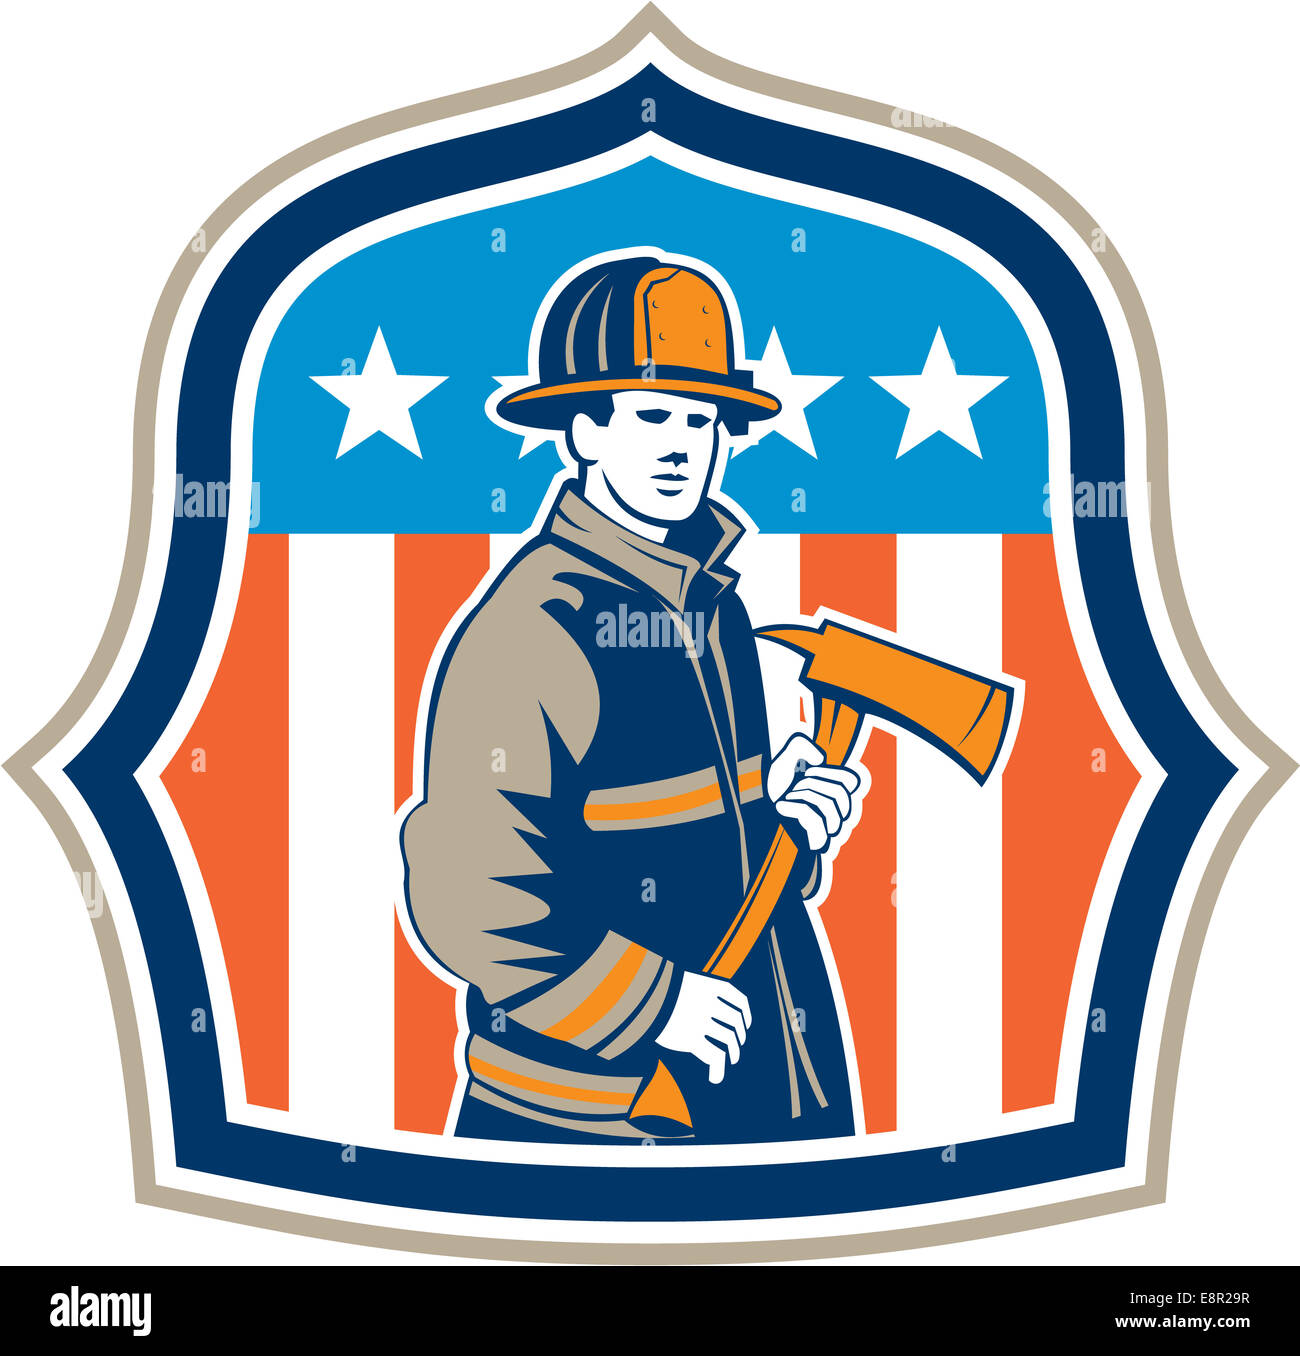 Illustration of an american fireman fire fighter emergency worker holding a fire axe viewed from front set inside shield crest with american stars and stripes flag in the background done in retro style. Stock Photo